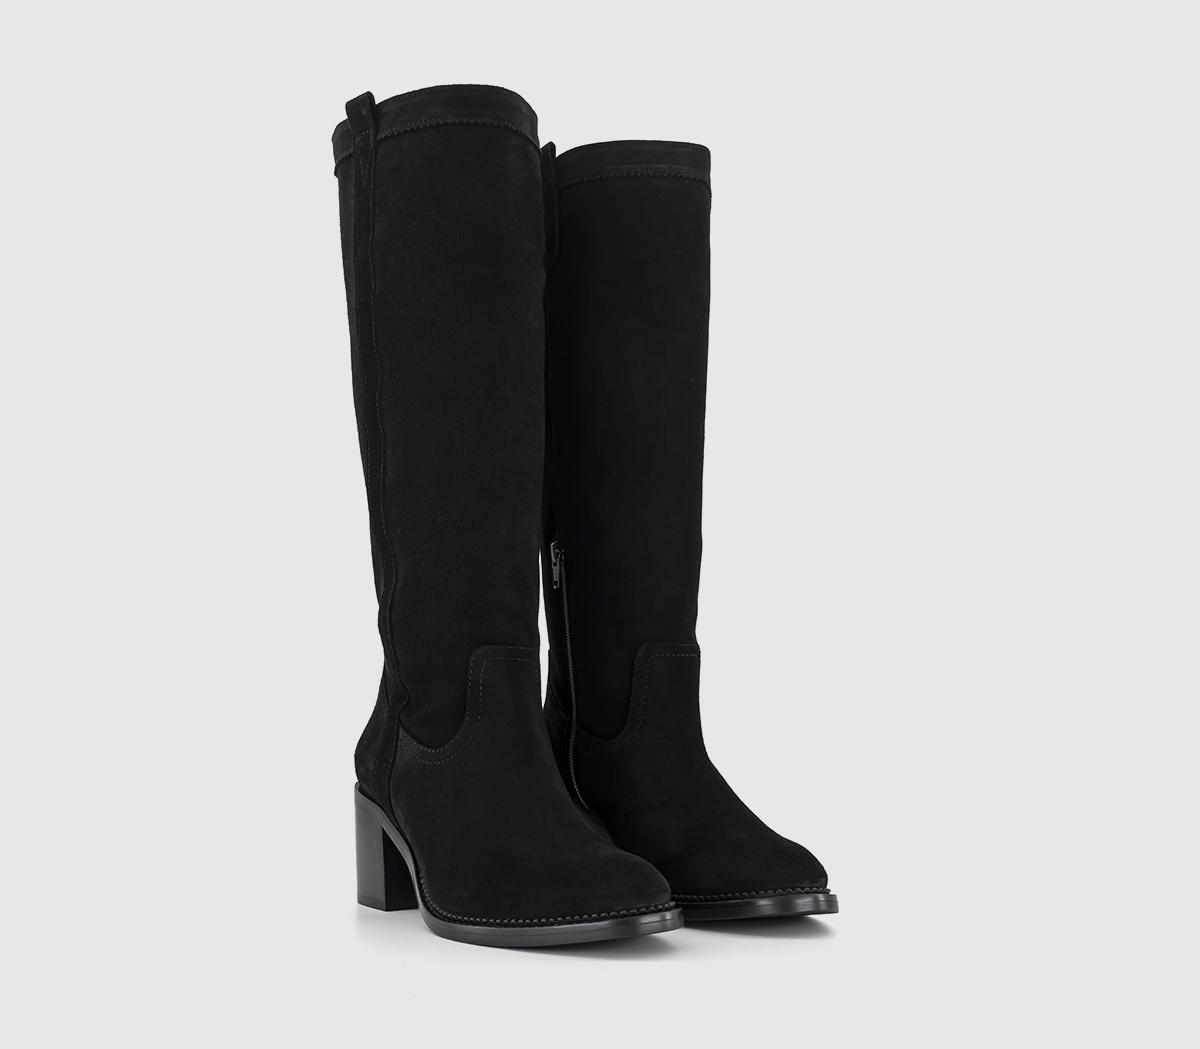 OFFICE Knockout Heeled Knee High Boots Black Suede - Knee High Boots